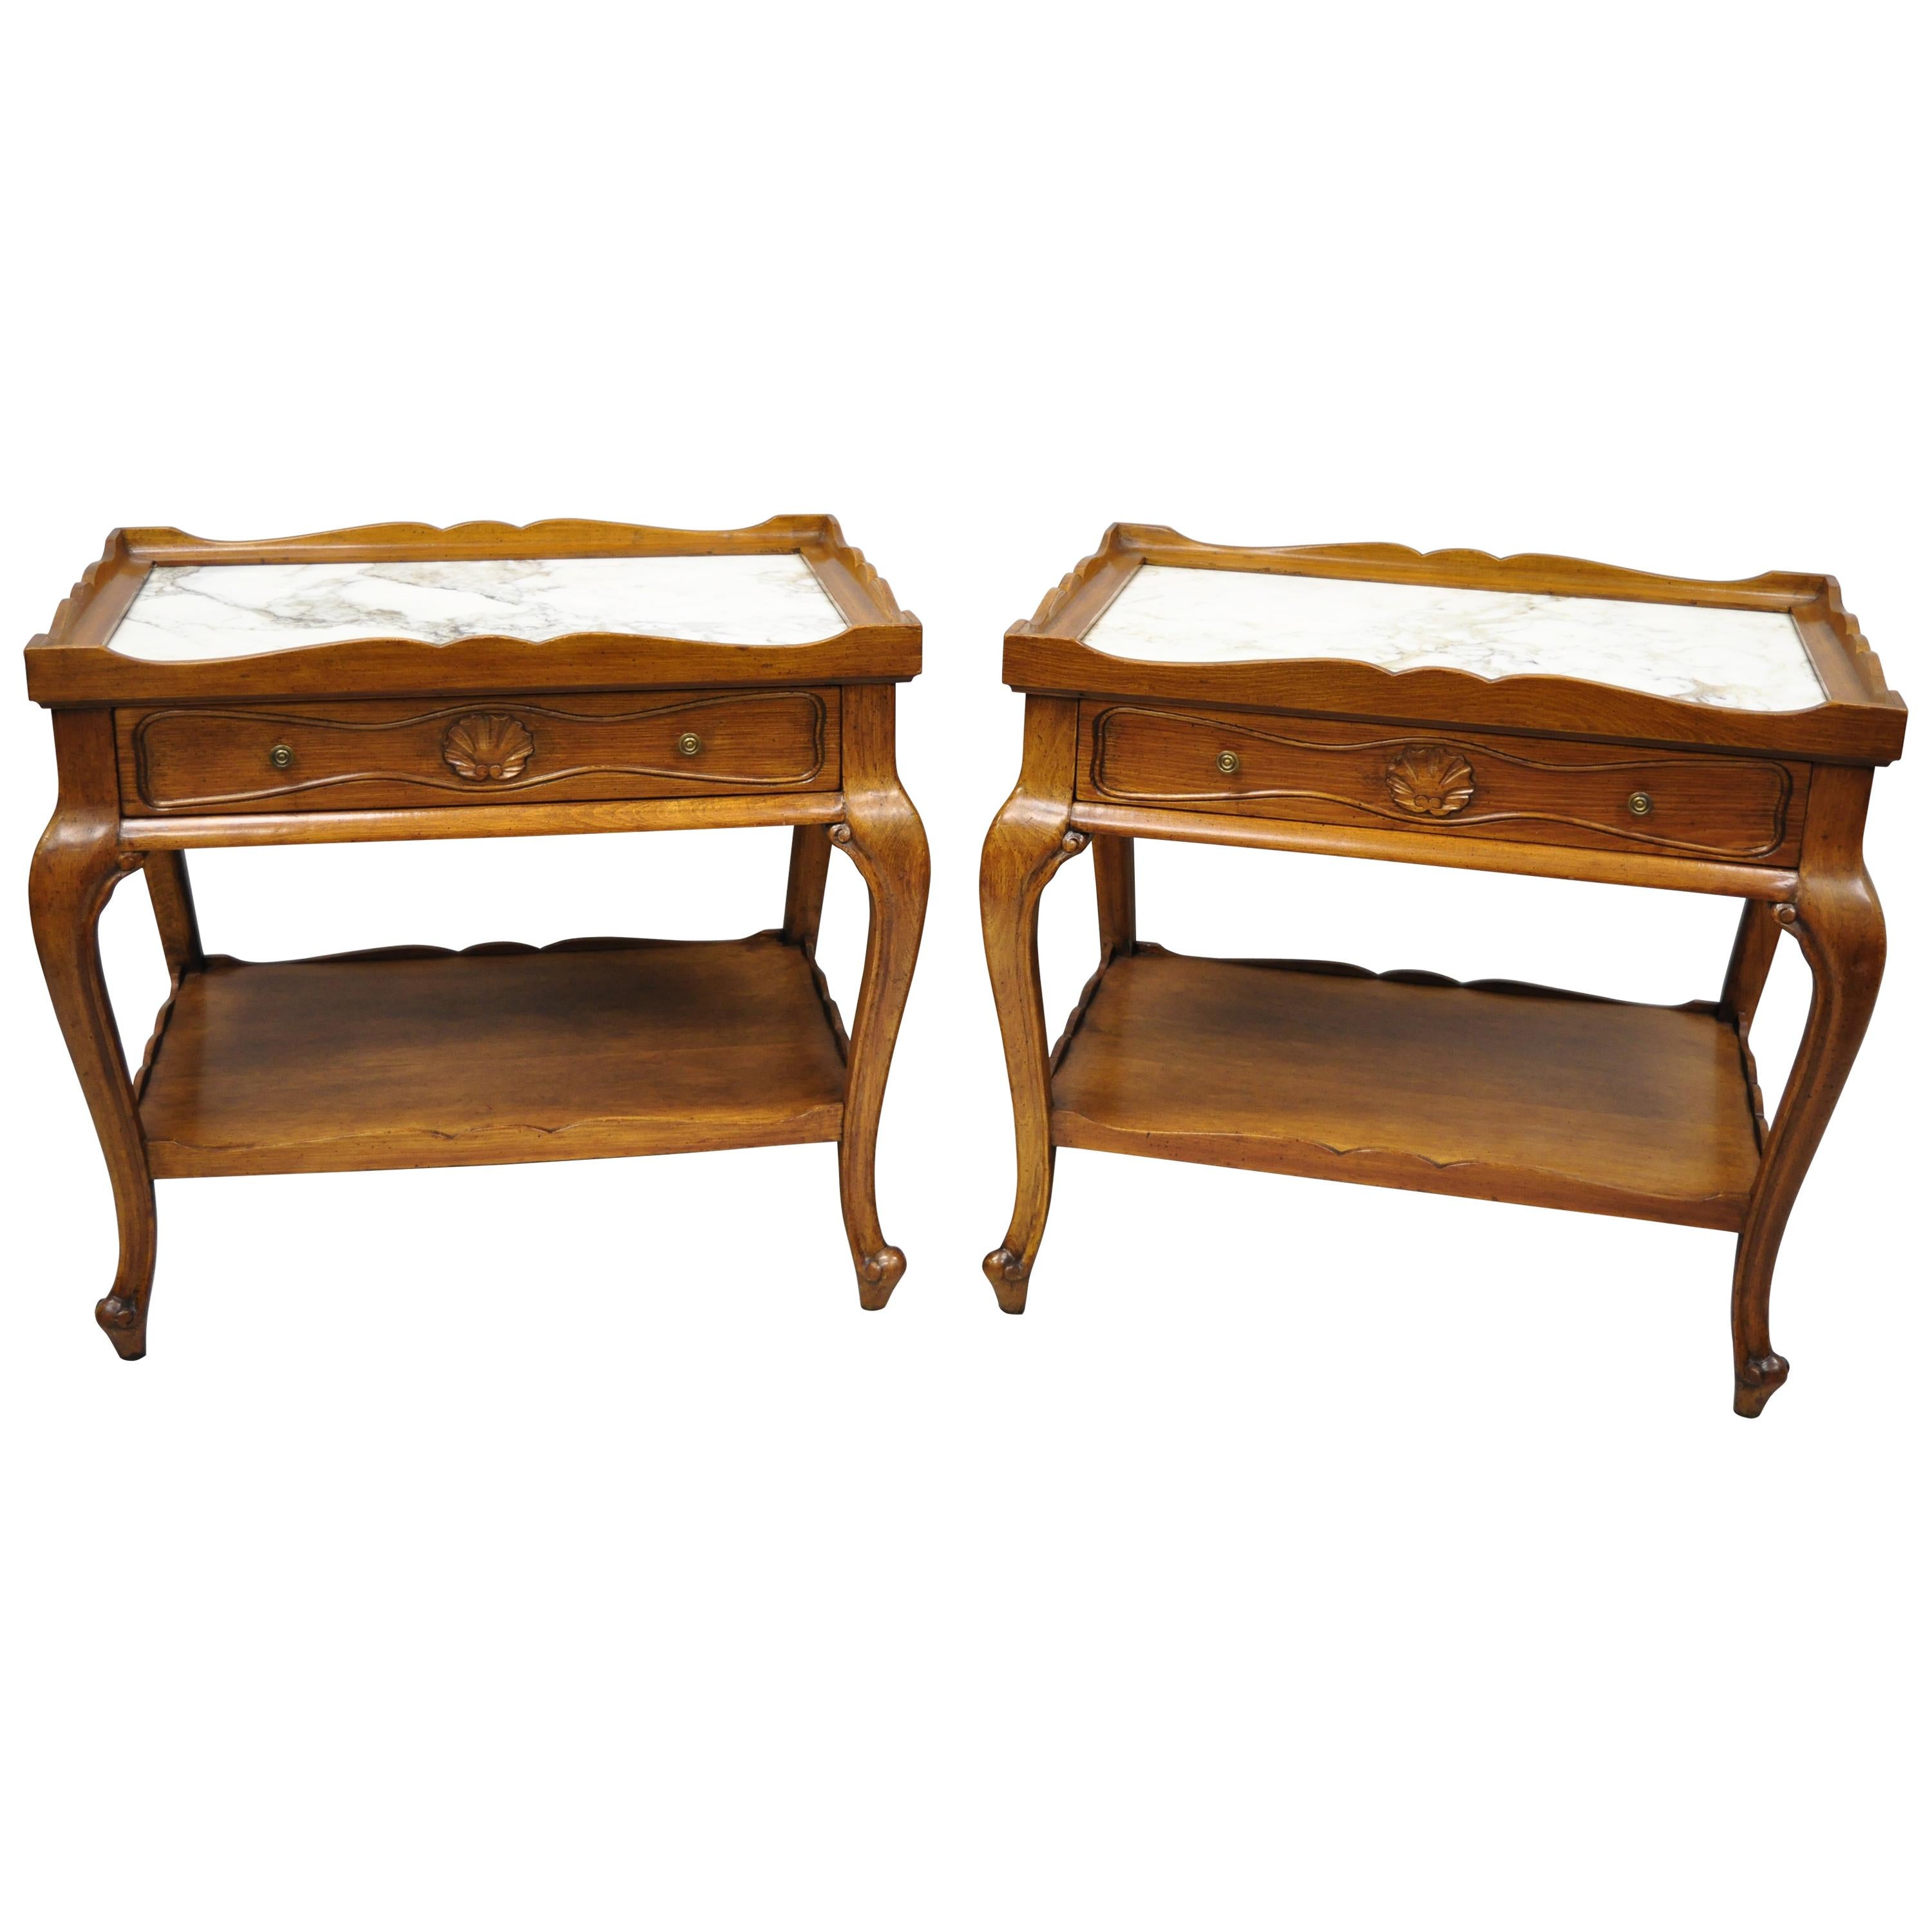 French Provincial Louis XV Style Marble-Top Shell Carved End Tables Danby, Pair For Sale